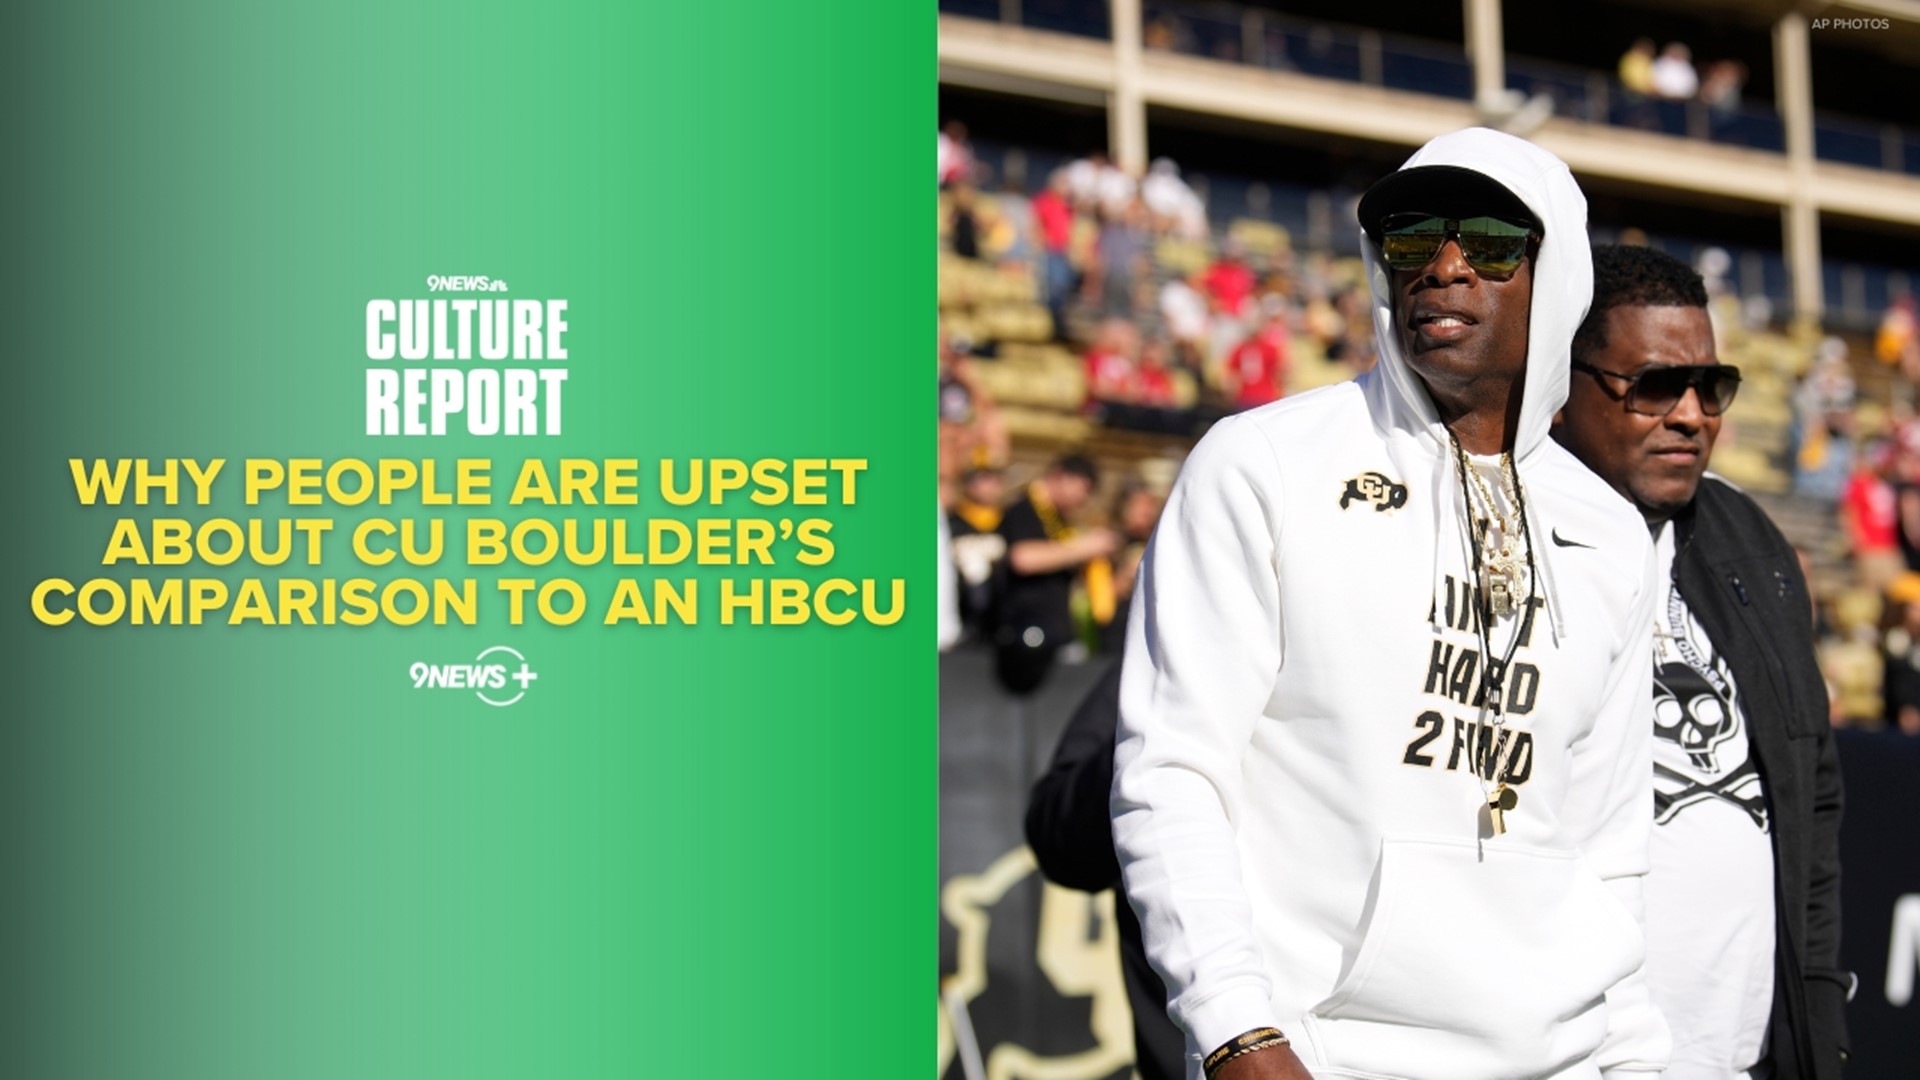 On this week's episode of the Culture Report, how Deion Sanders is bringing HBCU culture to Colorado, what 'no sabo kids' means, and more.